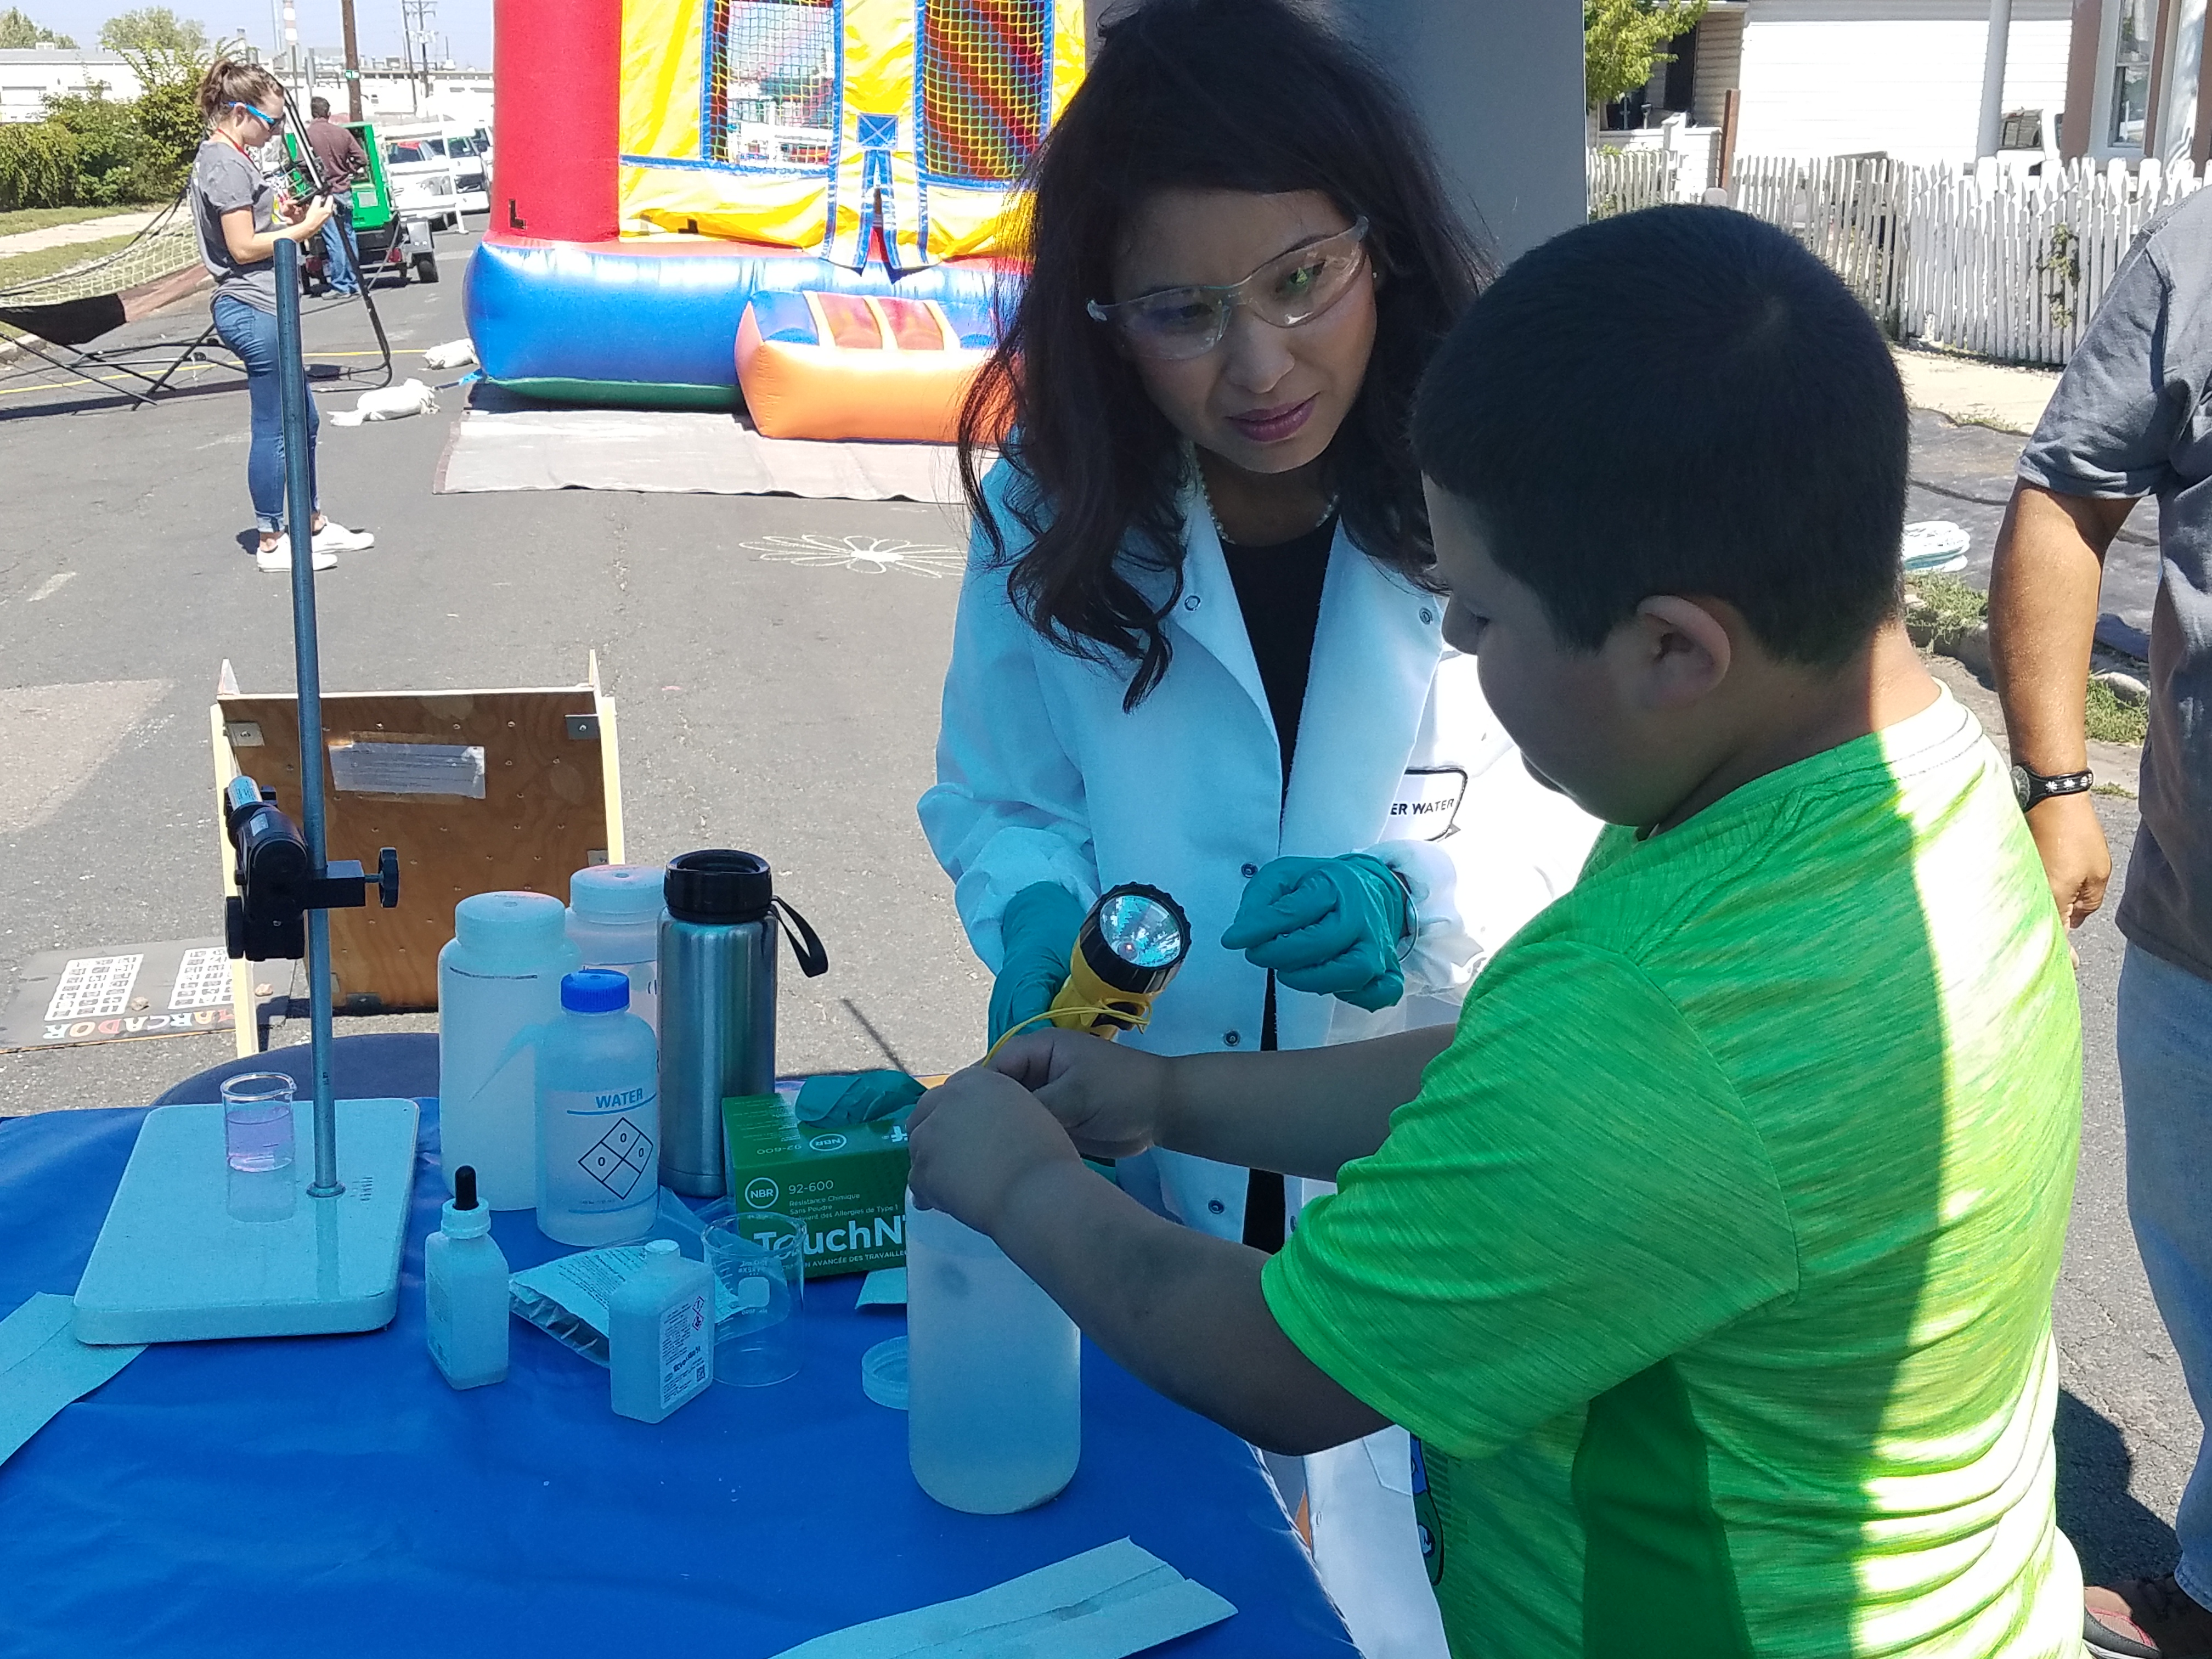 Selene Hernandez-Ruiz, water quality lab manager for Denver Water, talks about water quality with children at the GrowHaus' 6th Annual Block Party on Sept. 8, 2018.